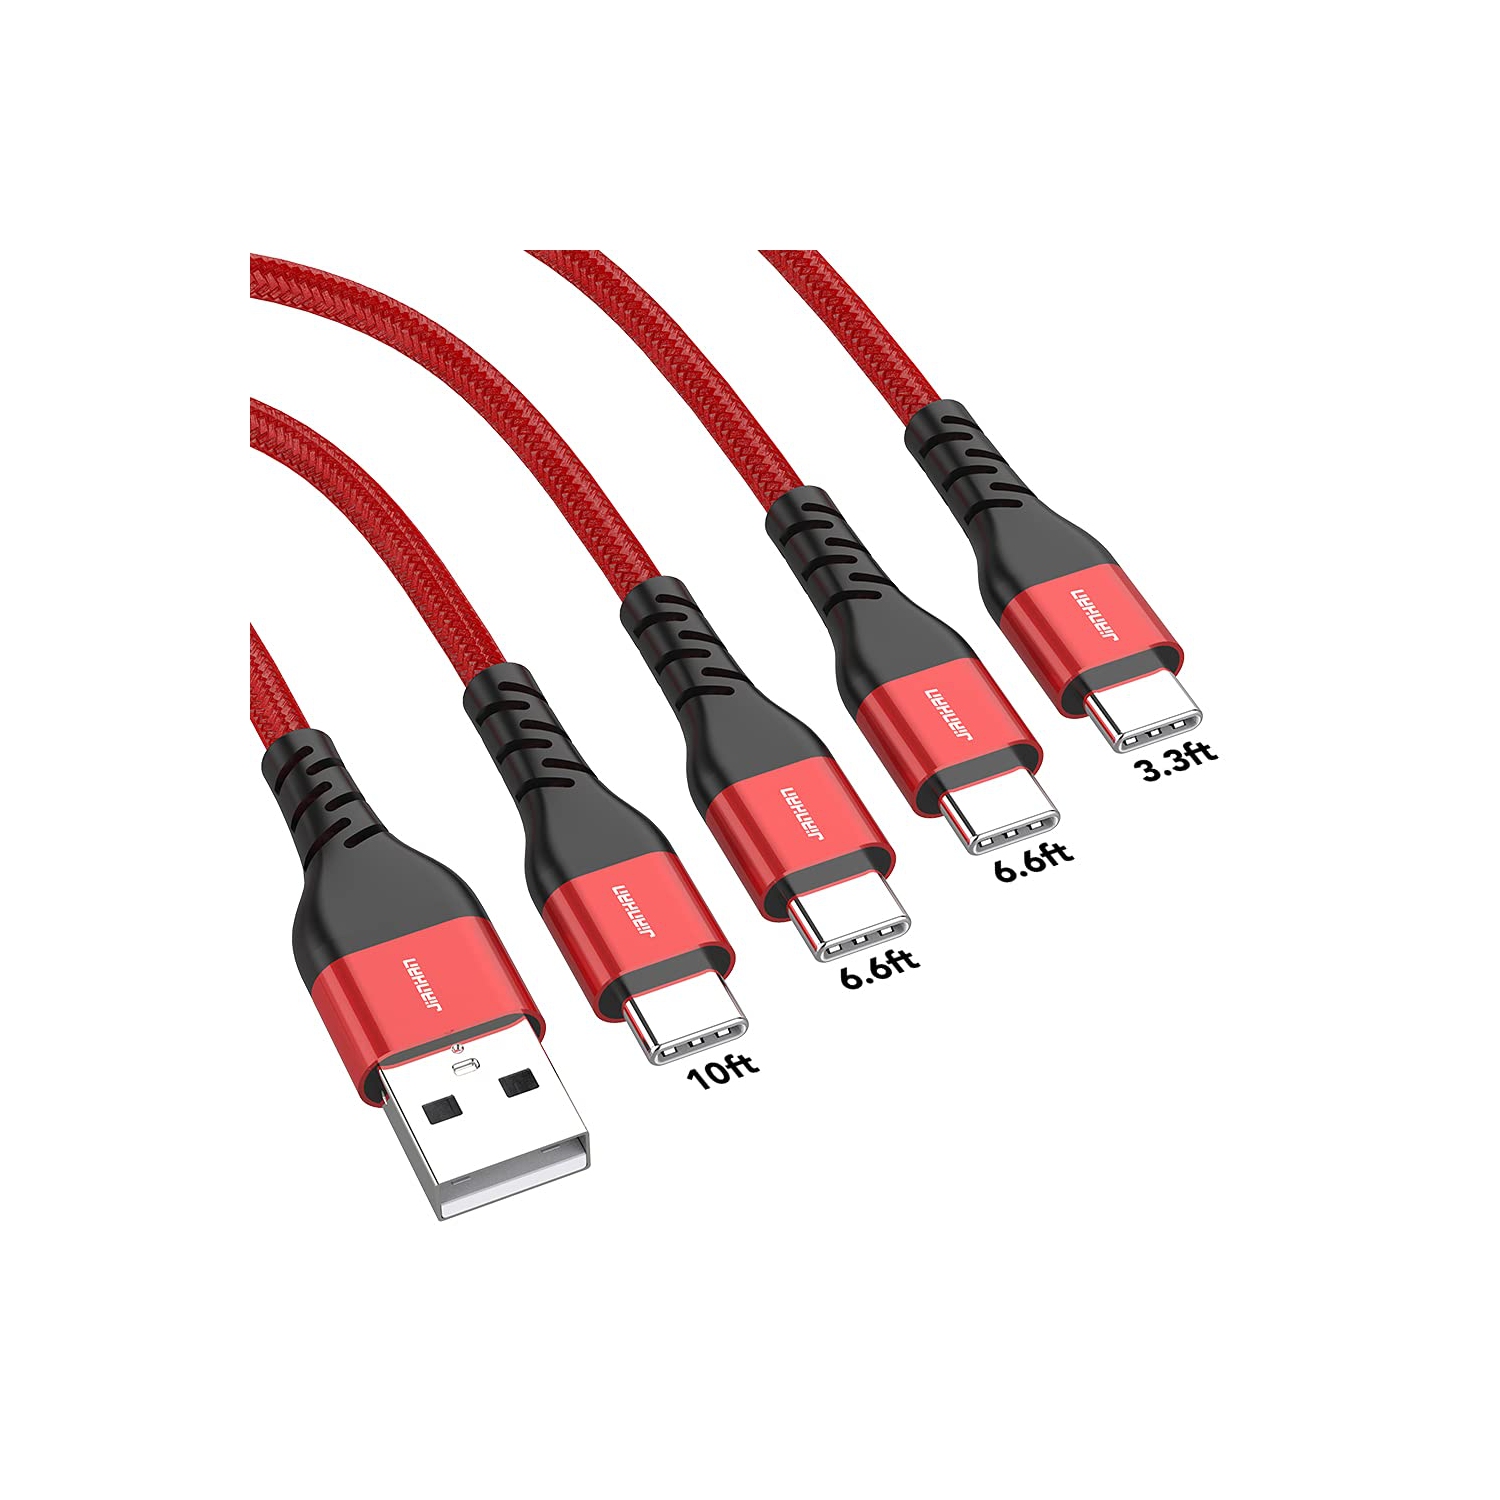 USB C Cable, 4 Pack (3.3ft+6.6ft+6.6ft+10ft) 3.1A QC3.0 Fast